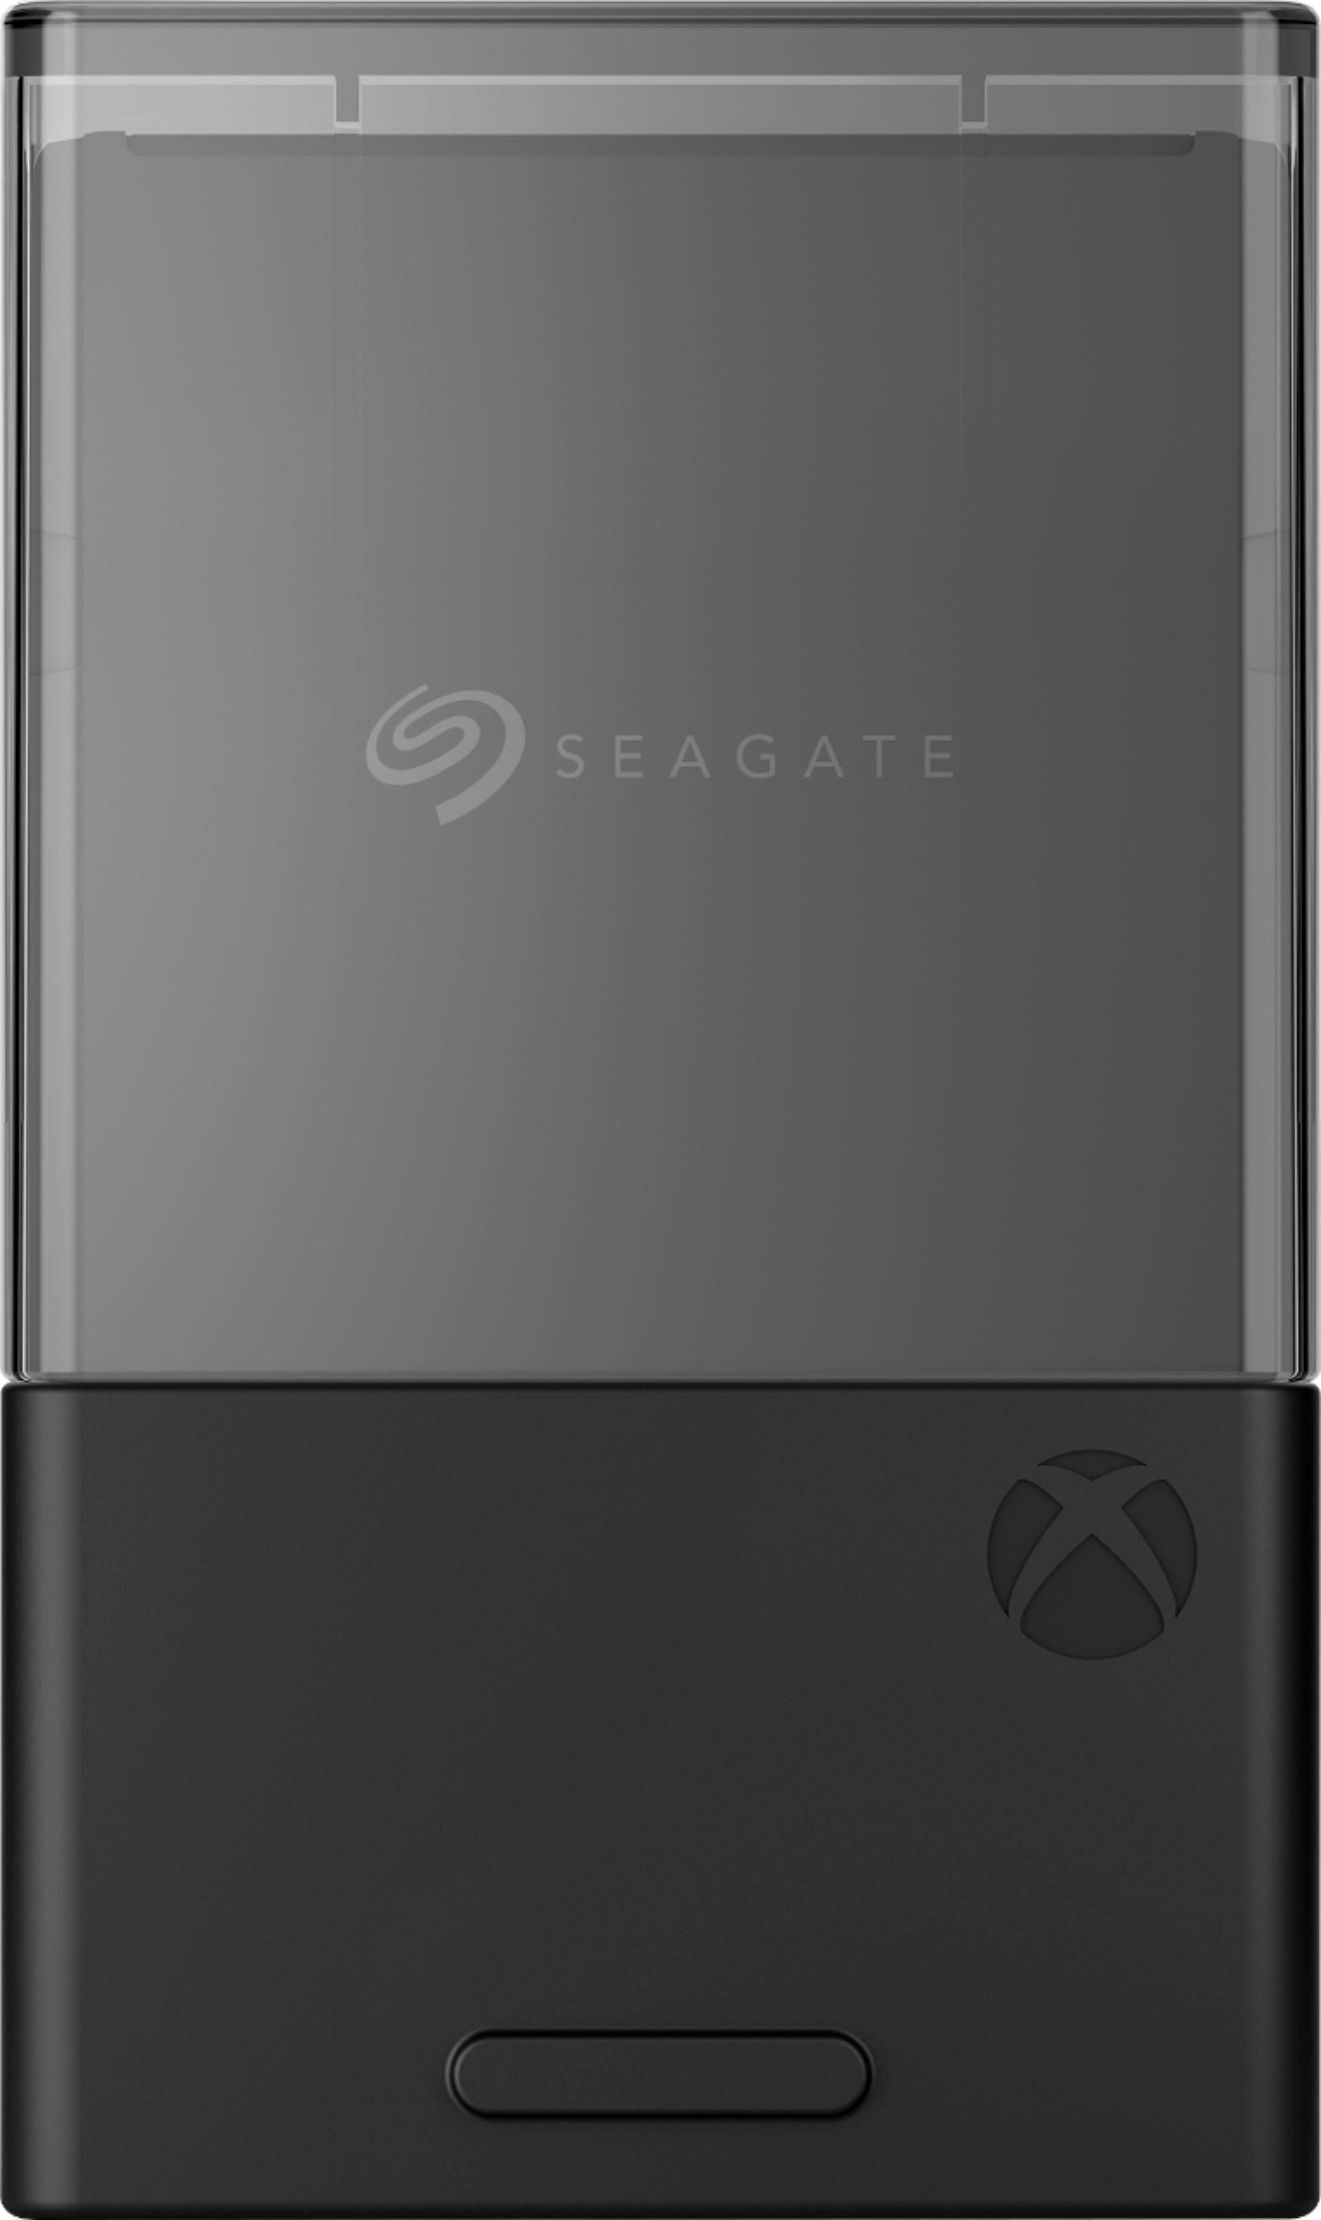 Career Oral I read a book Seagate 1TB Storage Expansion Card for Xbox Series X|S Internal NVMe SSD  Black STJR1000400 - Best Buy